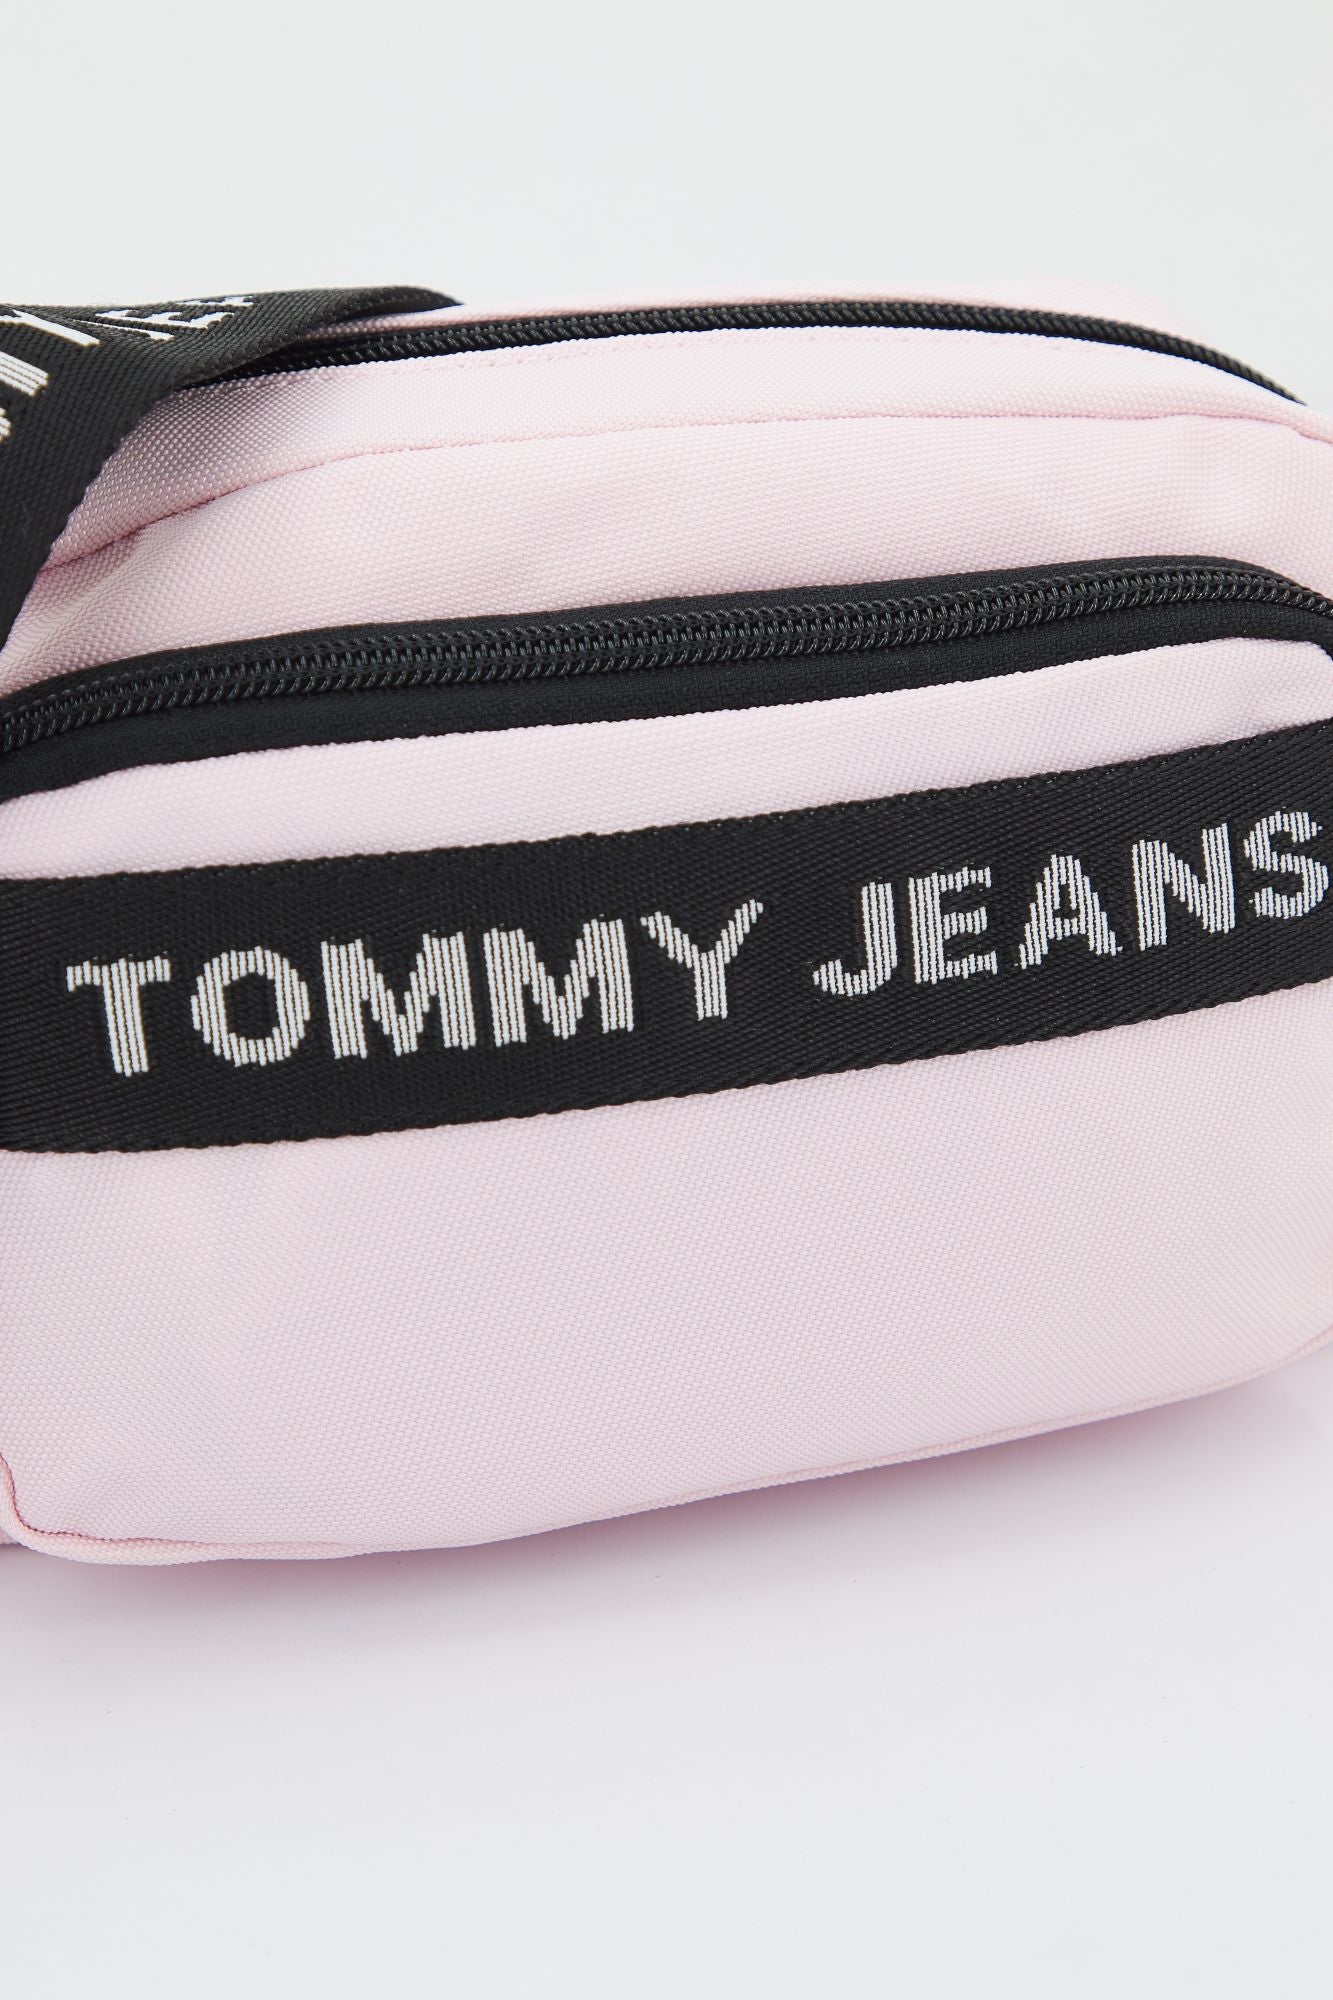 TOMMY JEANS ESSENTIAL CROSSOVER en color ROSA (4)